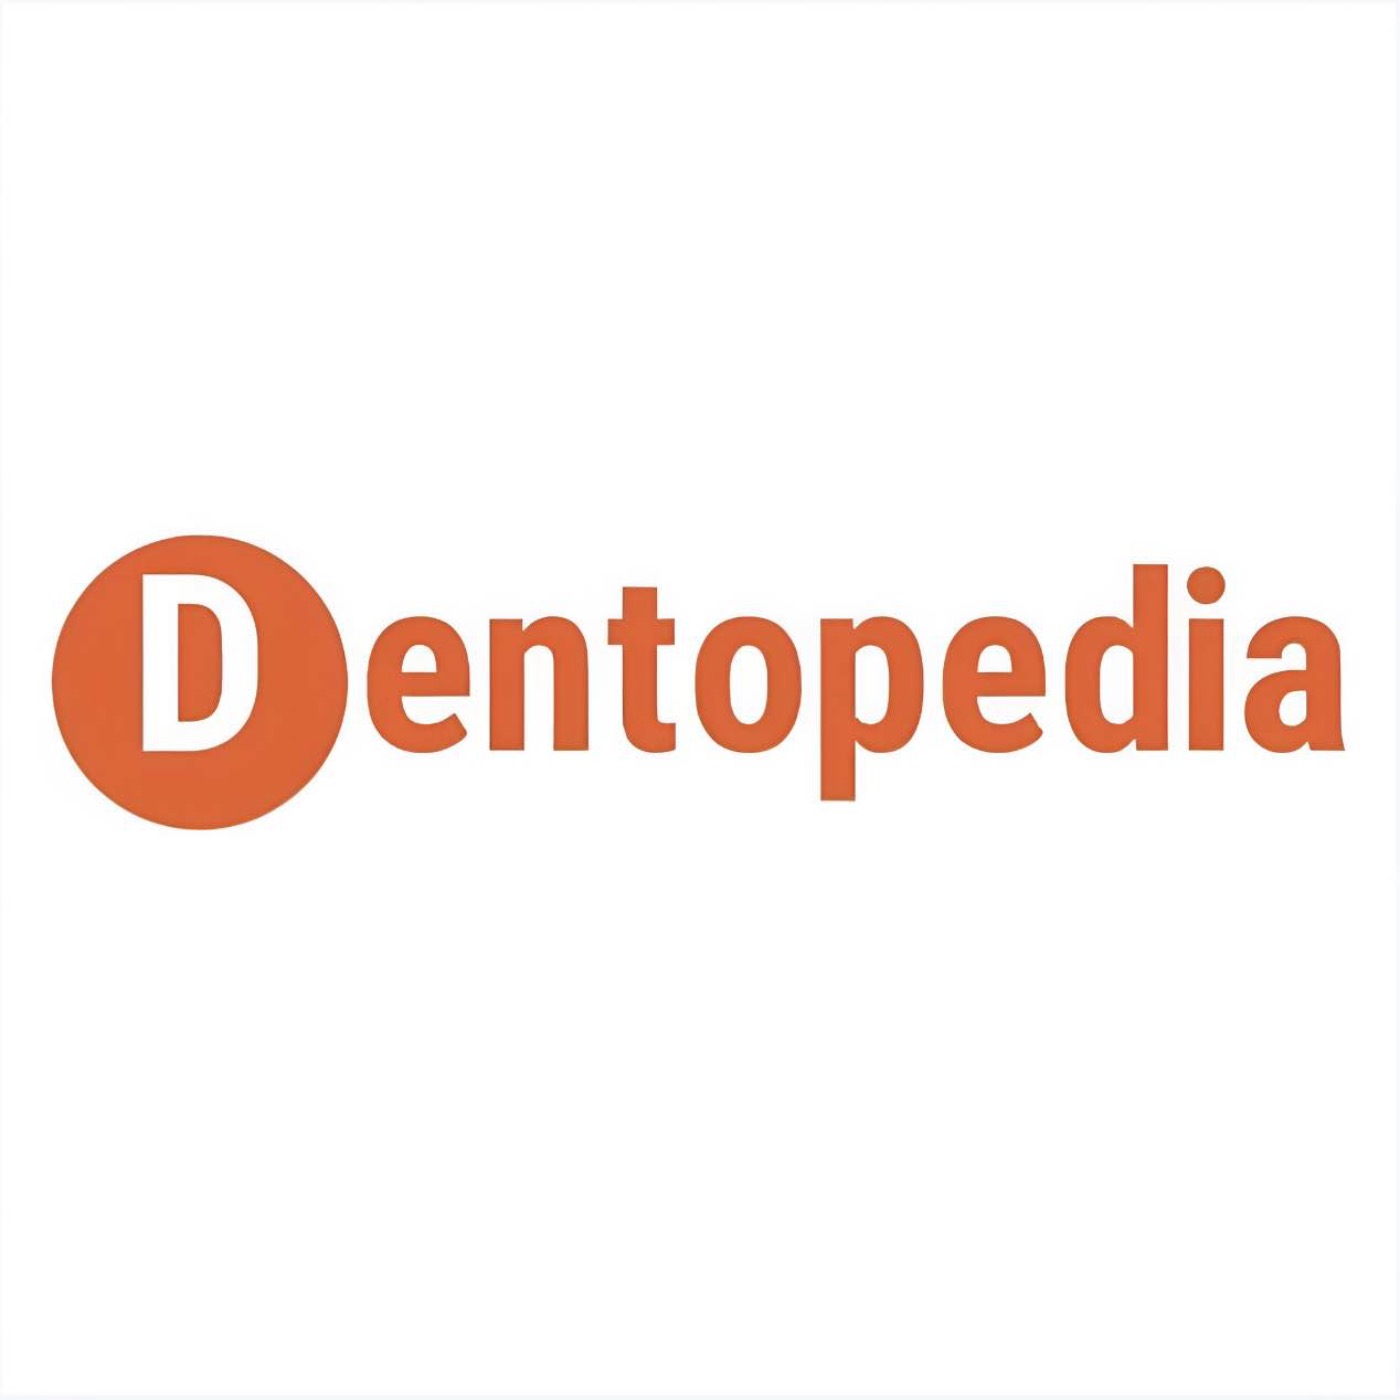 122.4-(Dentopedia)-Pain perception following computer-controlled versus conventional dental anesthesia